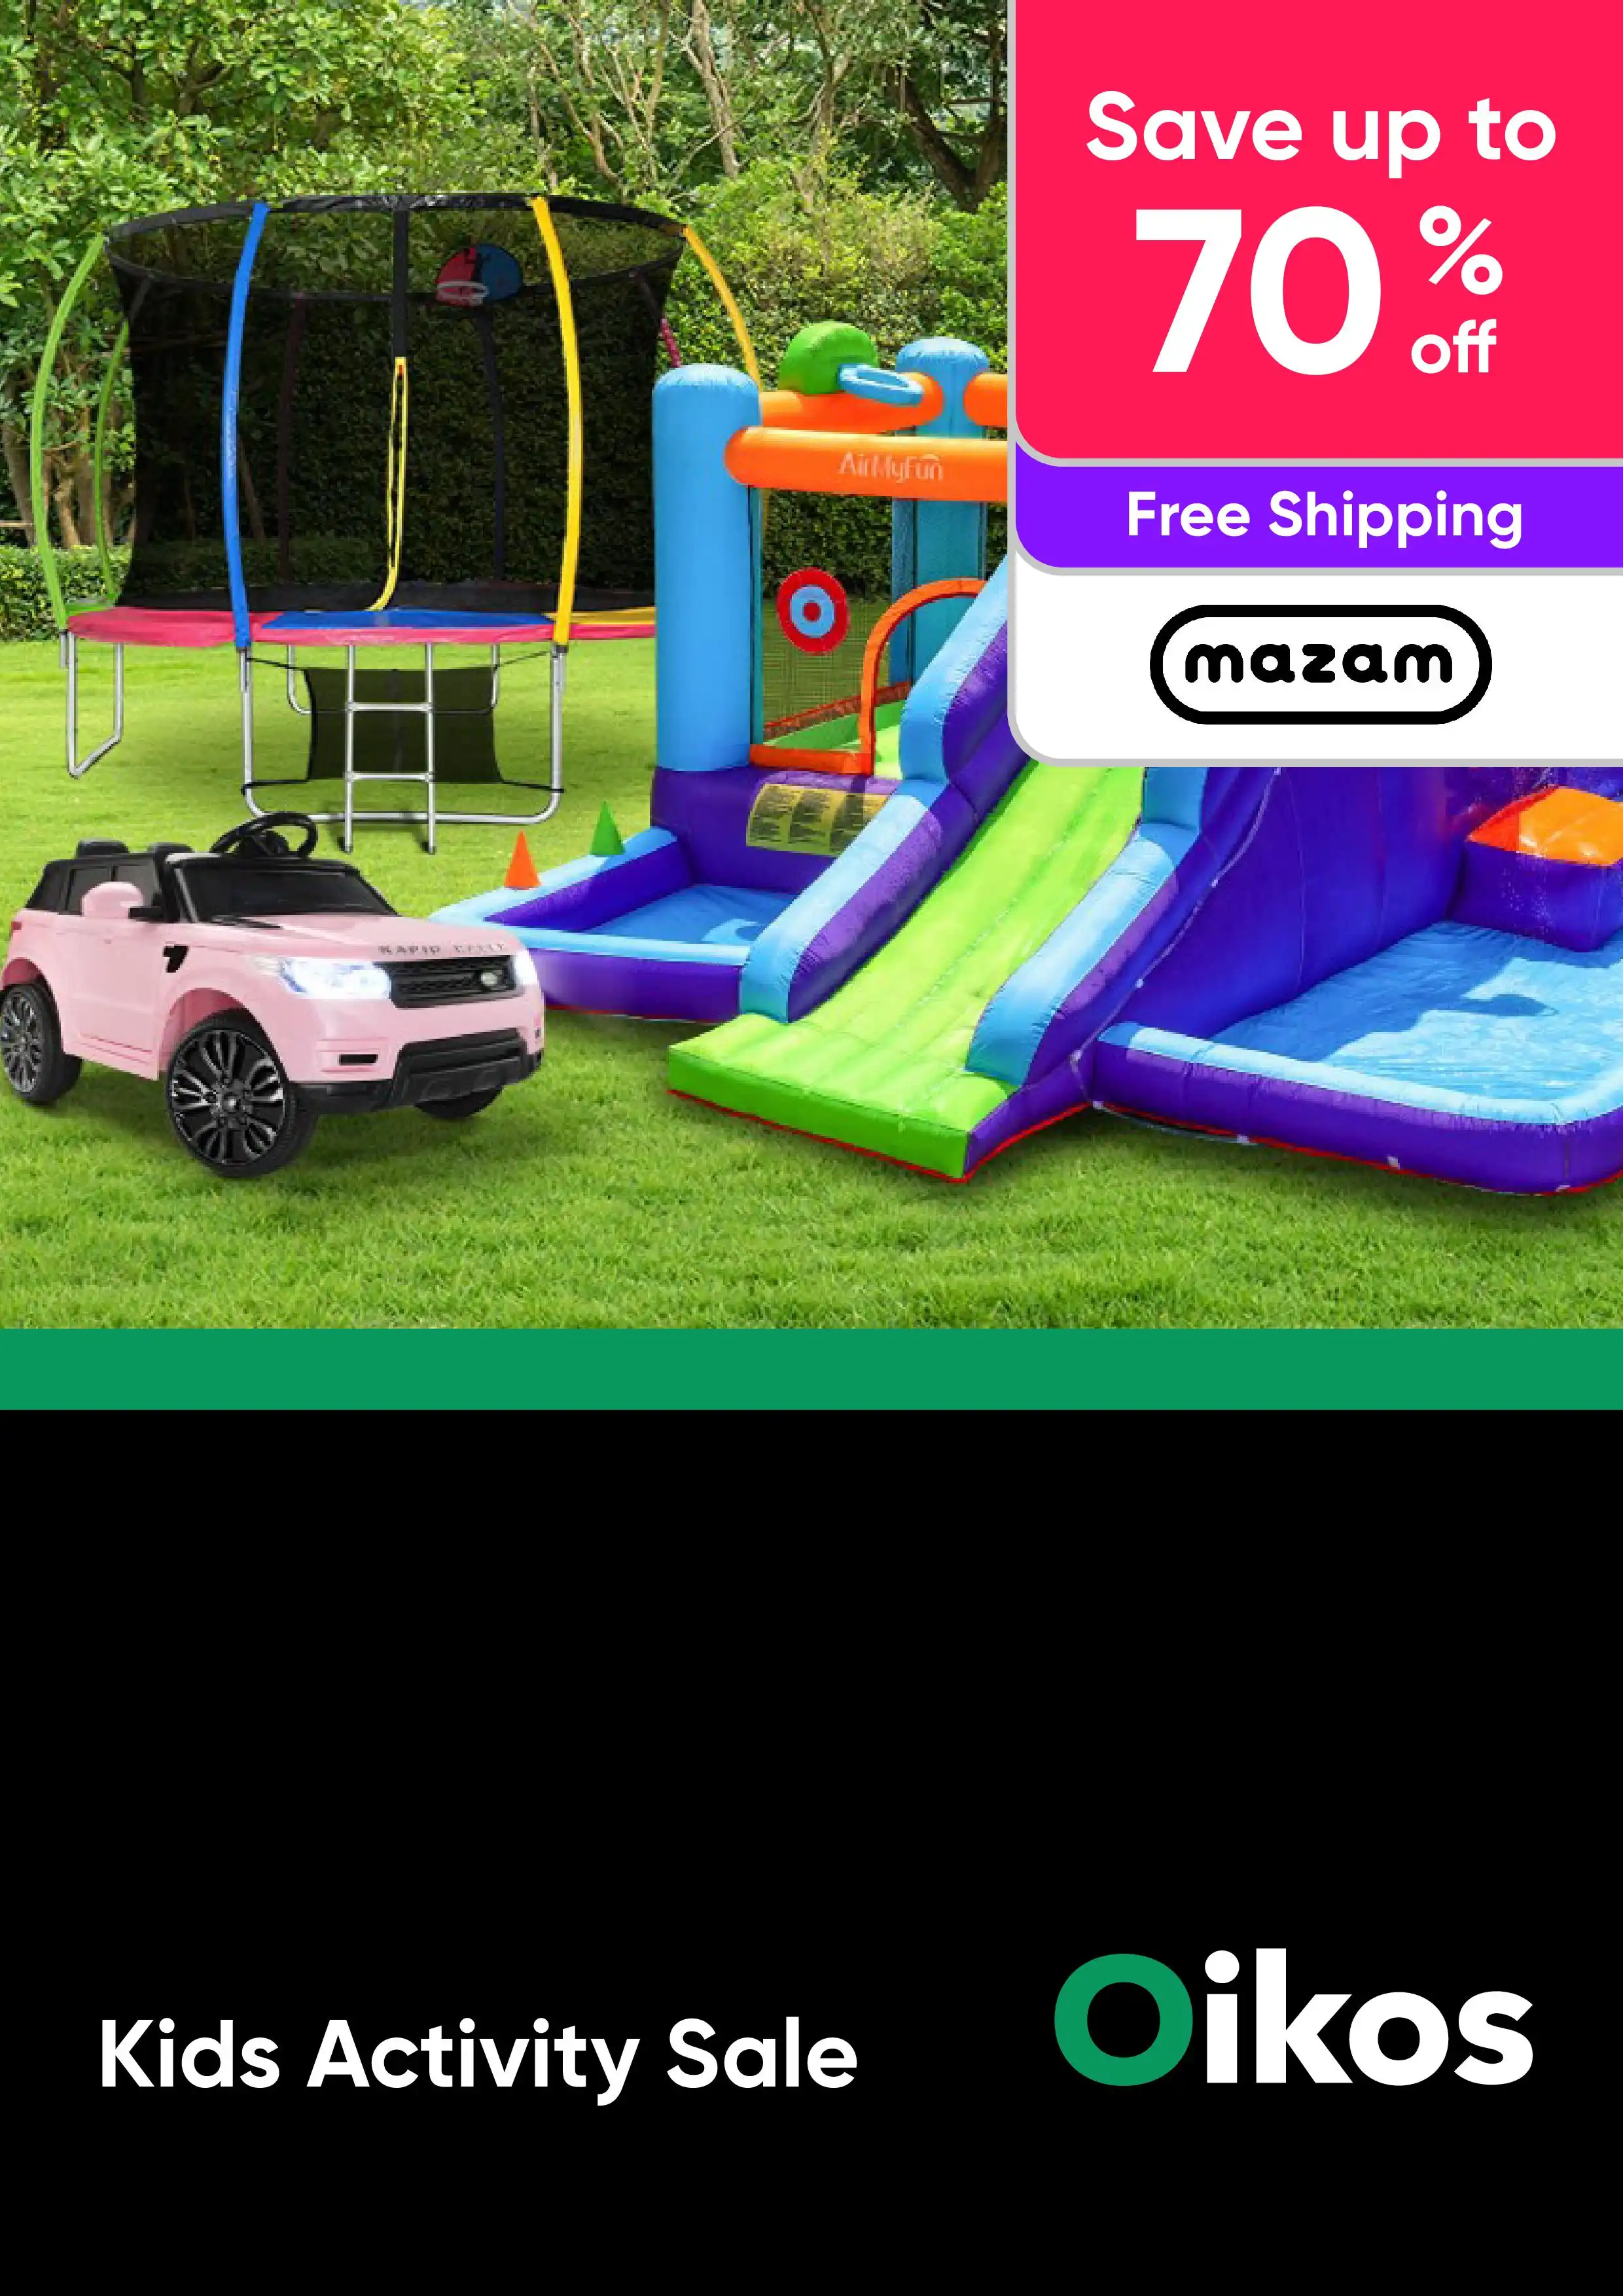 Kids Activity Sale - Trampolines, Ride Ons, Musical Instruments and More - Mazam - Up to 70% Off